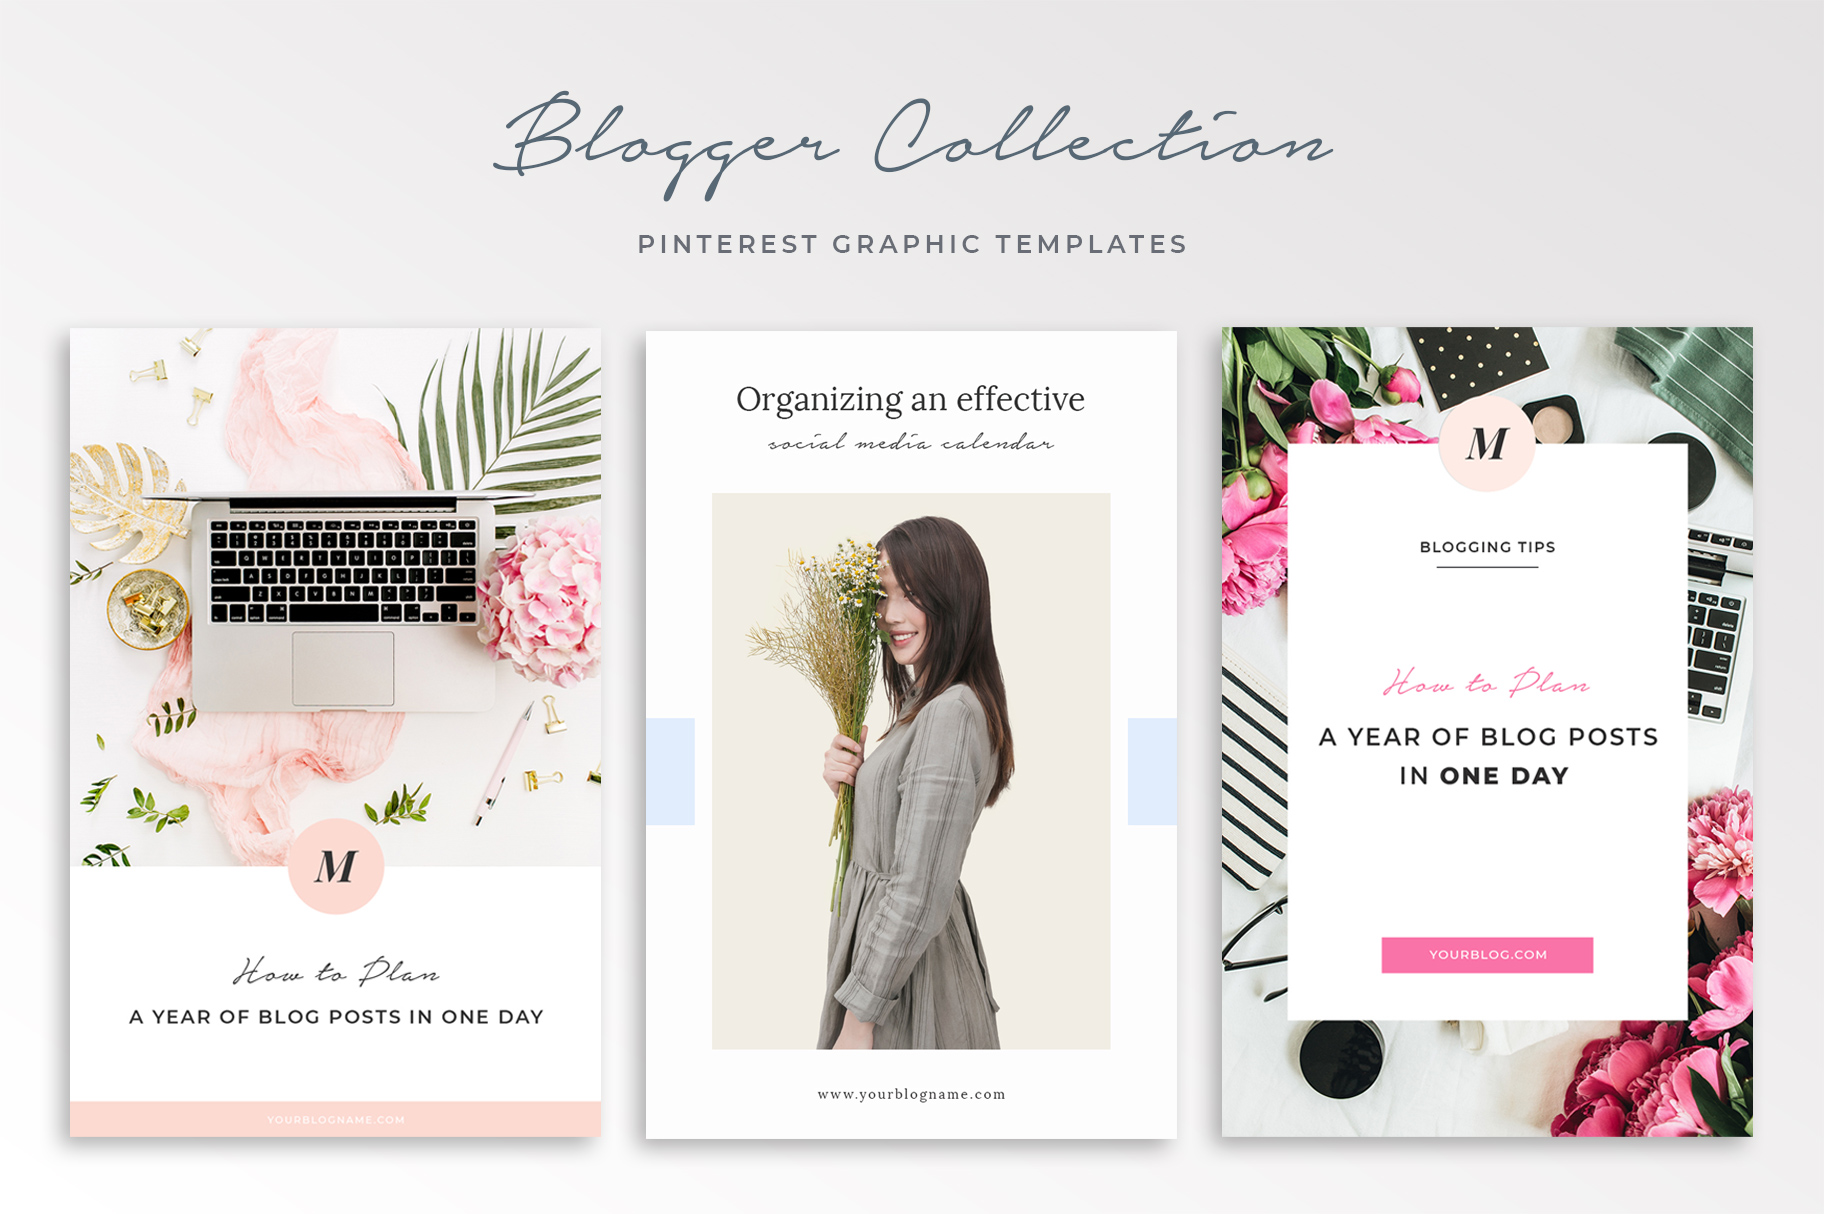 Pinterest Graphic Templates for Bloggers